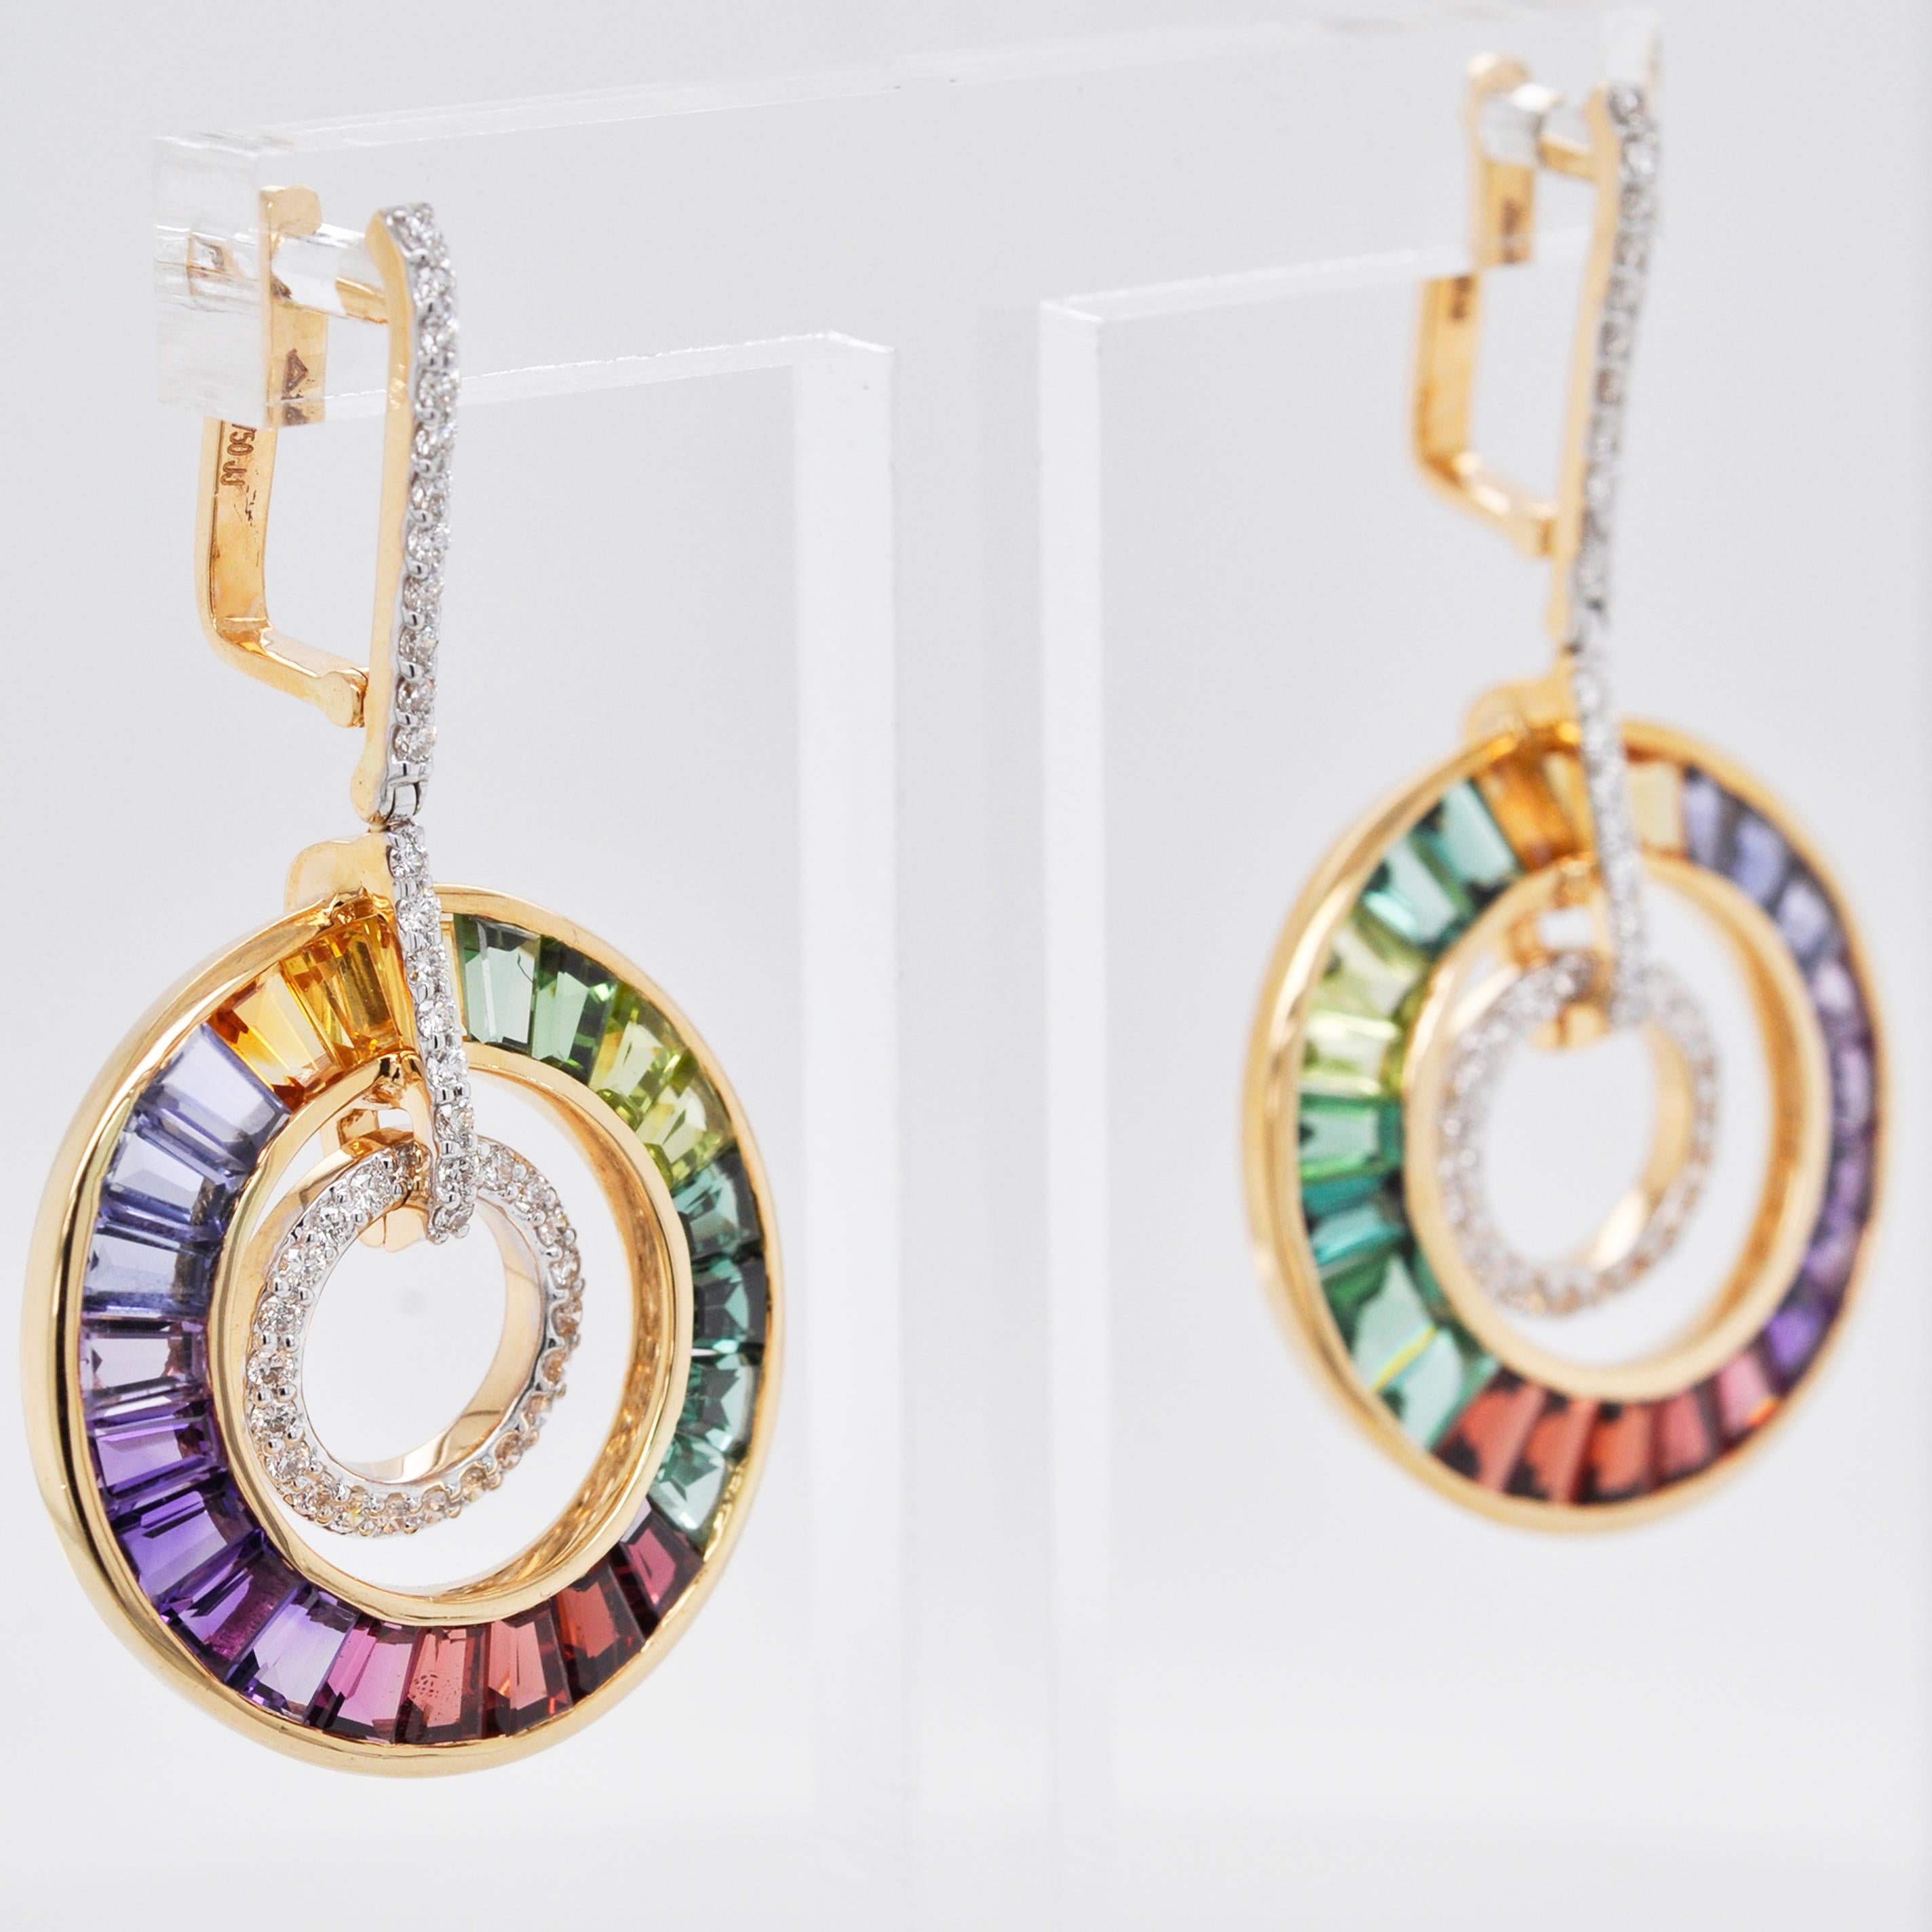 18 karat gold art deco style rainbow gemstones diamond circular dangle earrings.

This extraordinary art deco style delicate multicolor circular earring is encapsulating. Meticulous hand-picked selections of 48 lustrous gemstones out of many are set